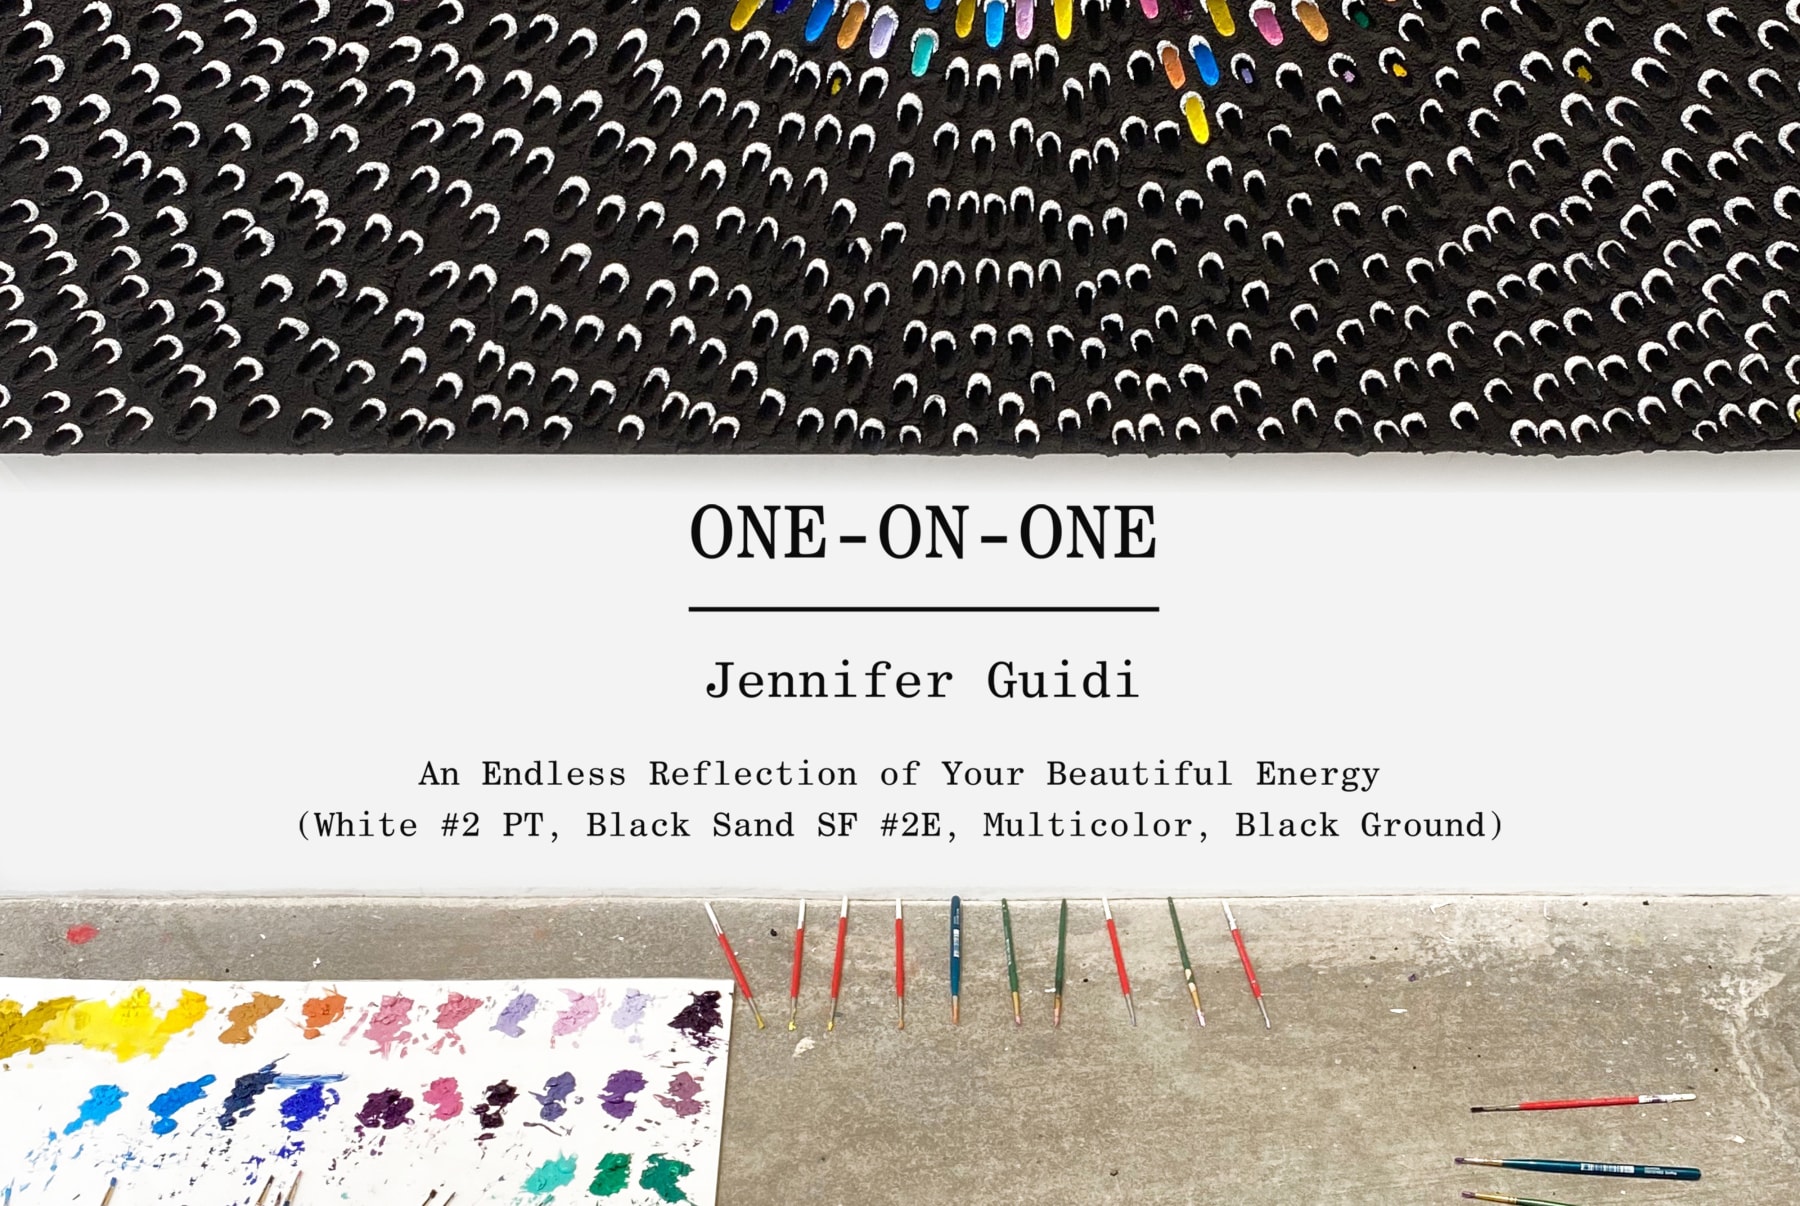 One-on-One: Jennifer Guidi - An Endless Reflection of Your Beautiful Energy (White #2 PT, Black Sand SF #2E, Multicolor, Black Ground) - Viewing Room - David Kordansky Gallery